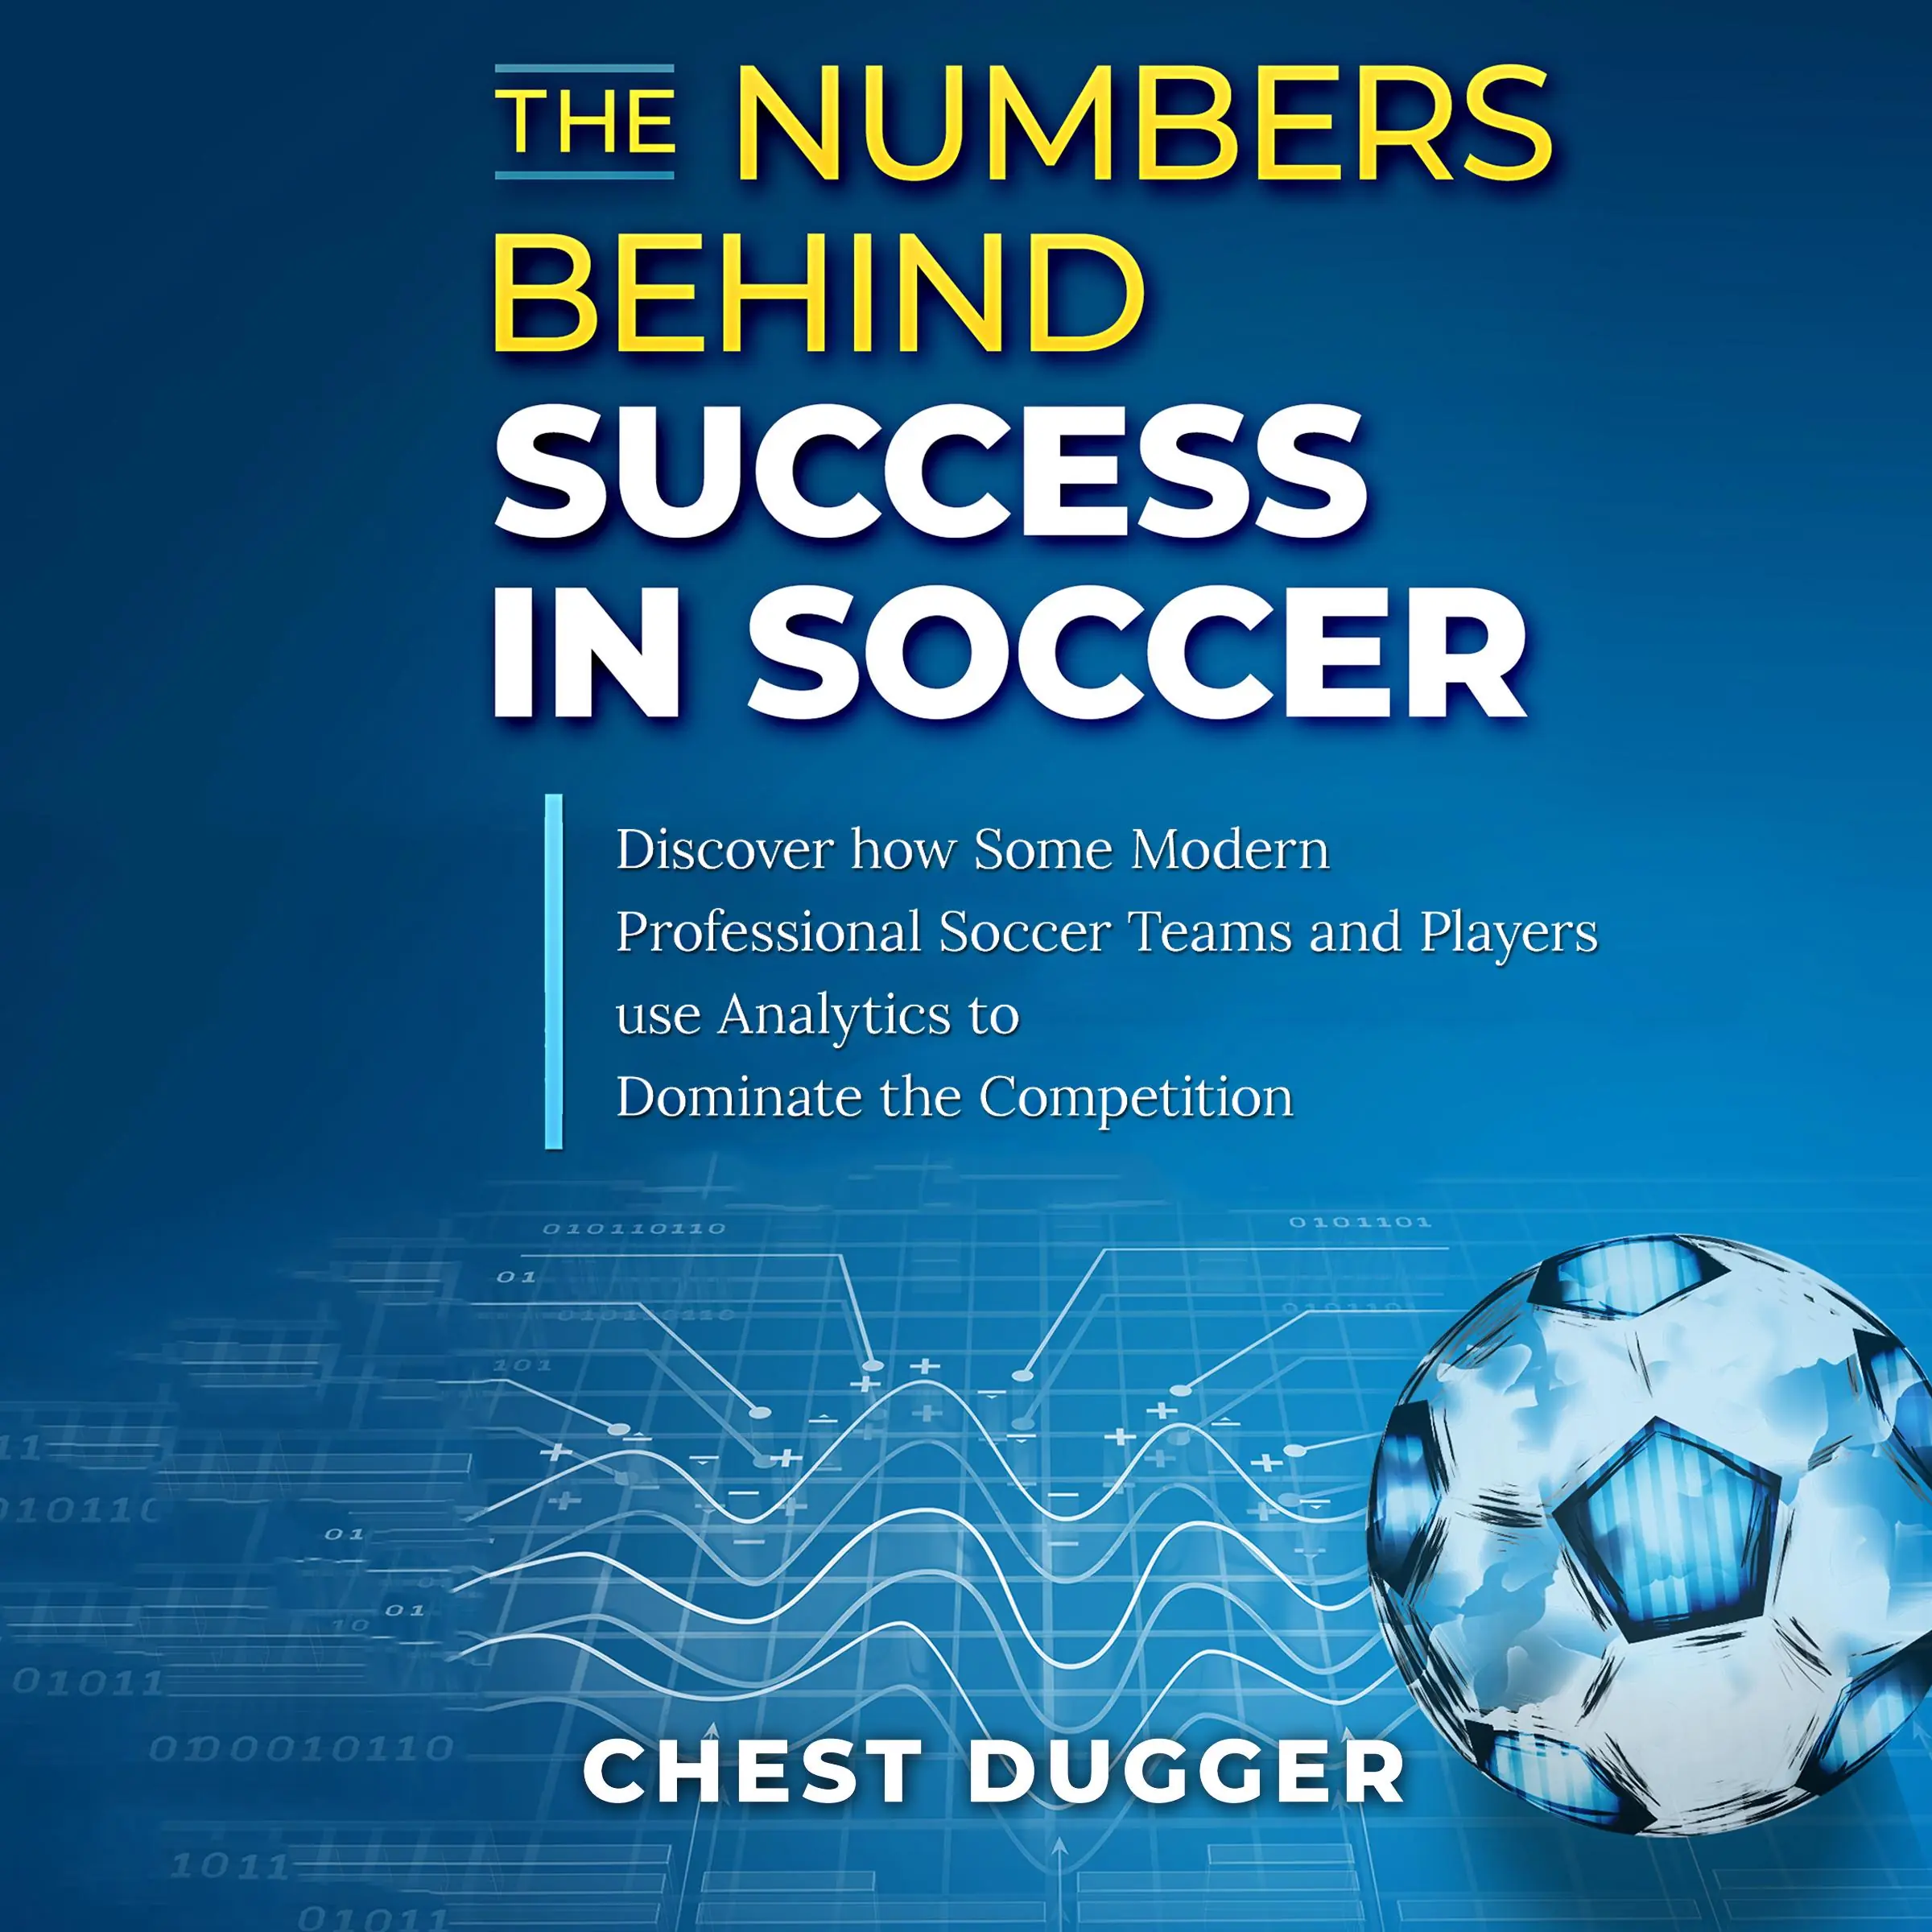 The Numbers Behind Success in Soccer: Discover how Some Modern Professional Soccer Teams and Players Use Analytics to Dominate the Competition Audiobook by Chest Dugger